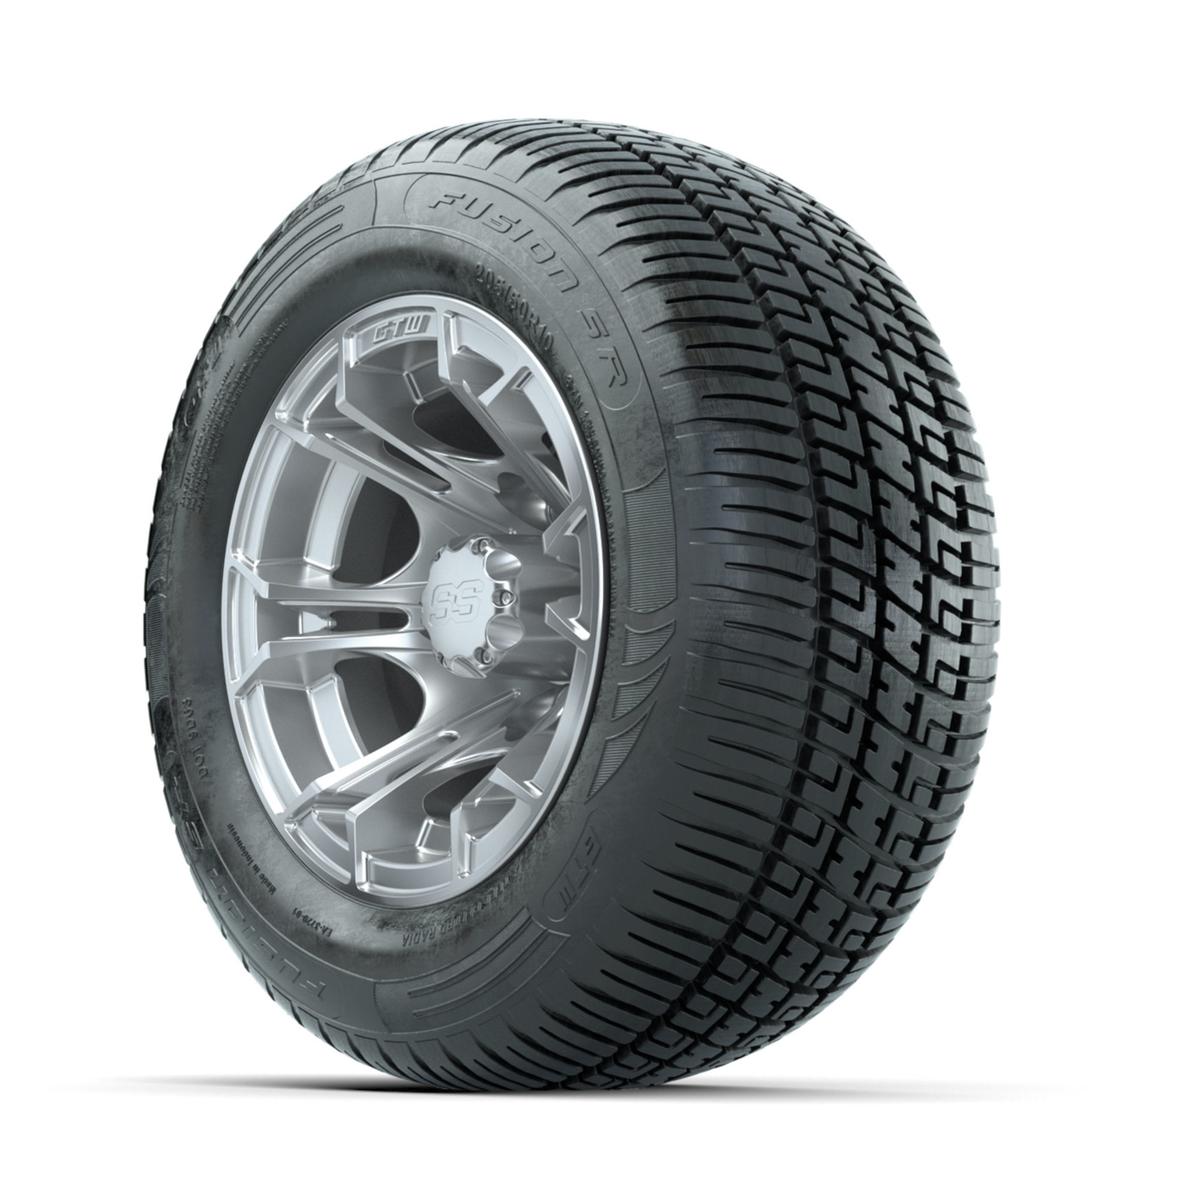 GTW Spyder Silver Brush 10 in Wheels with 205/50-10 Fusion SR Steel Belted Radial Tires – Full Set